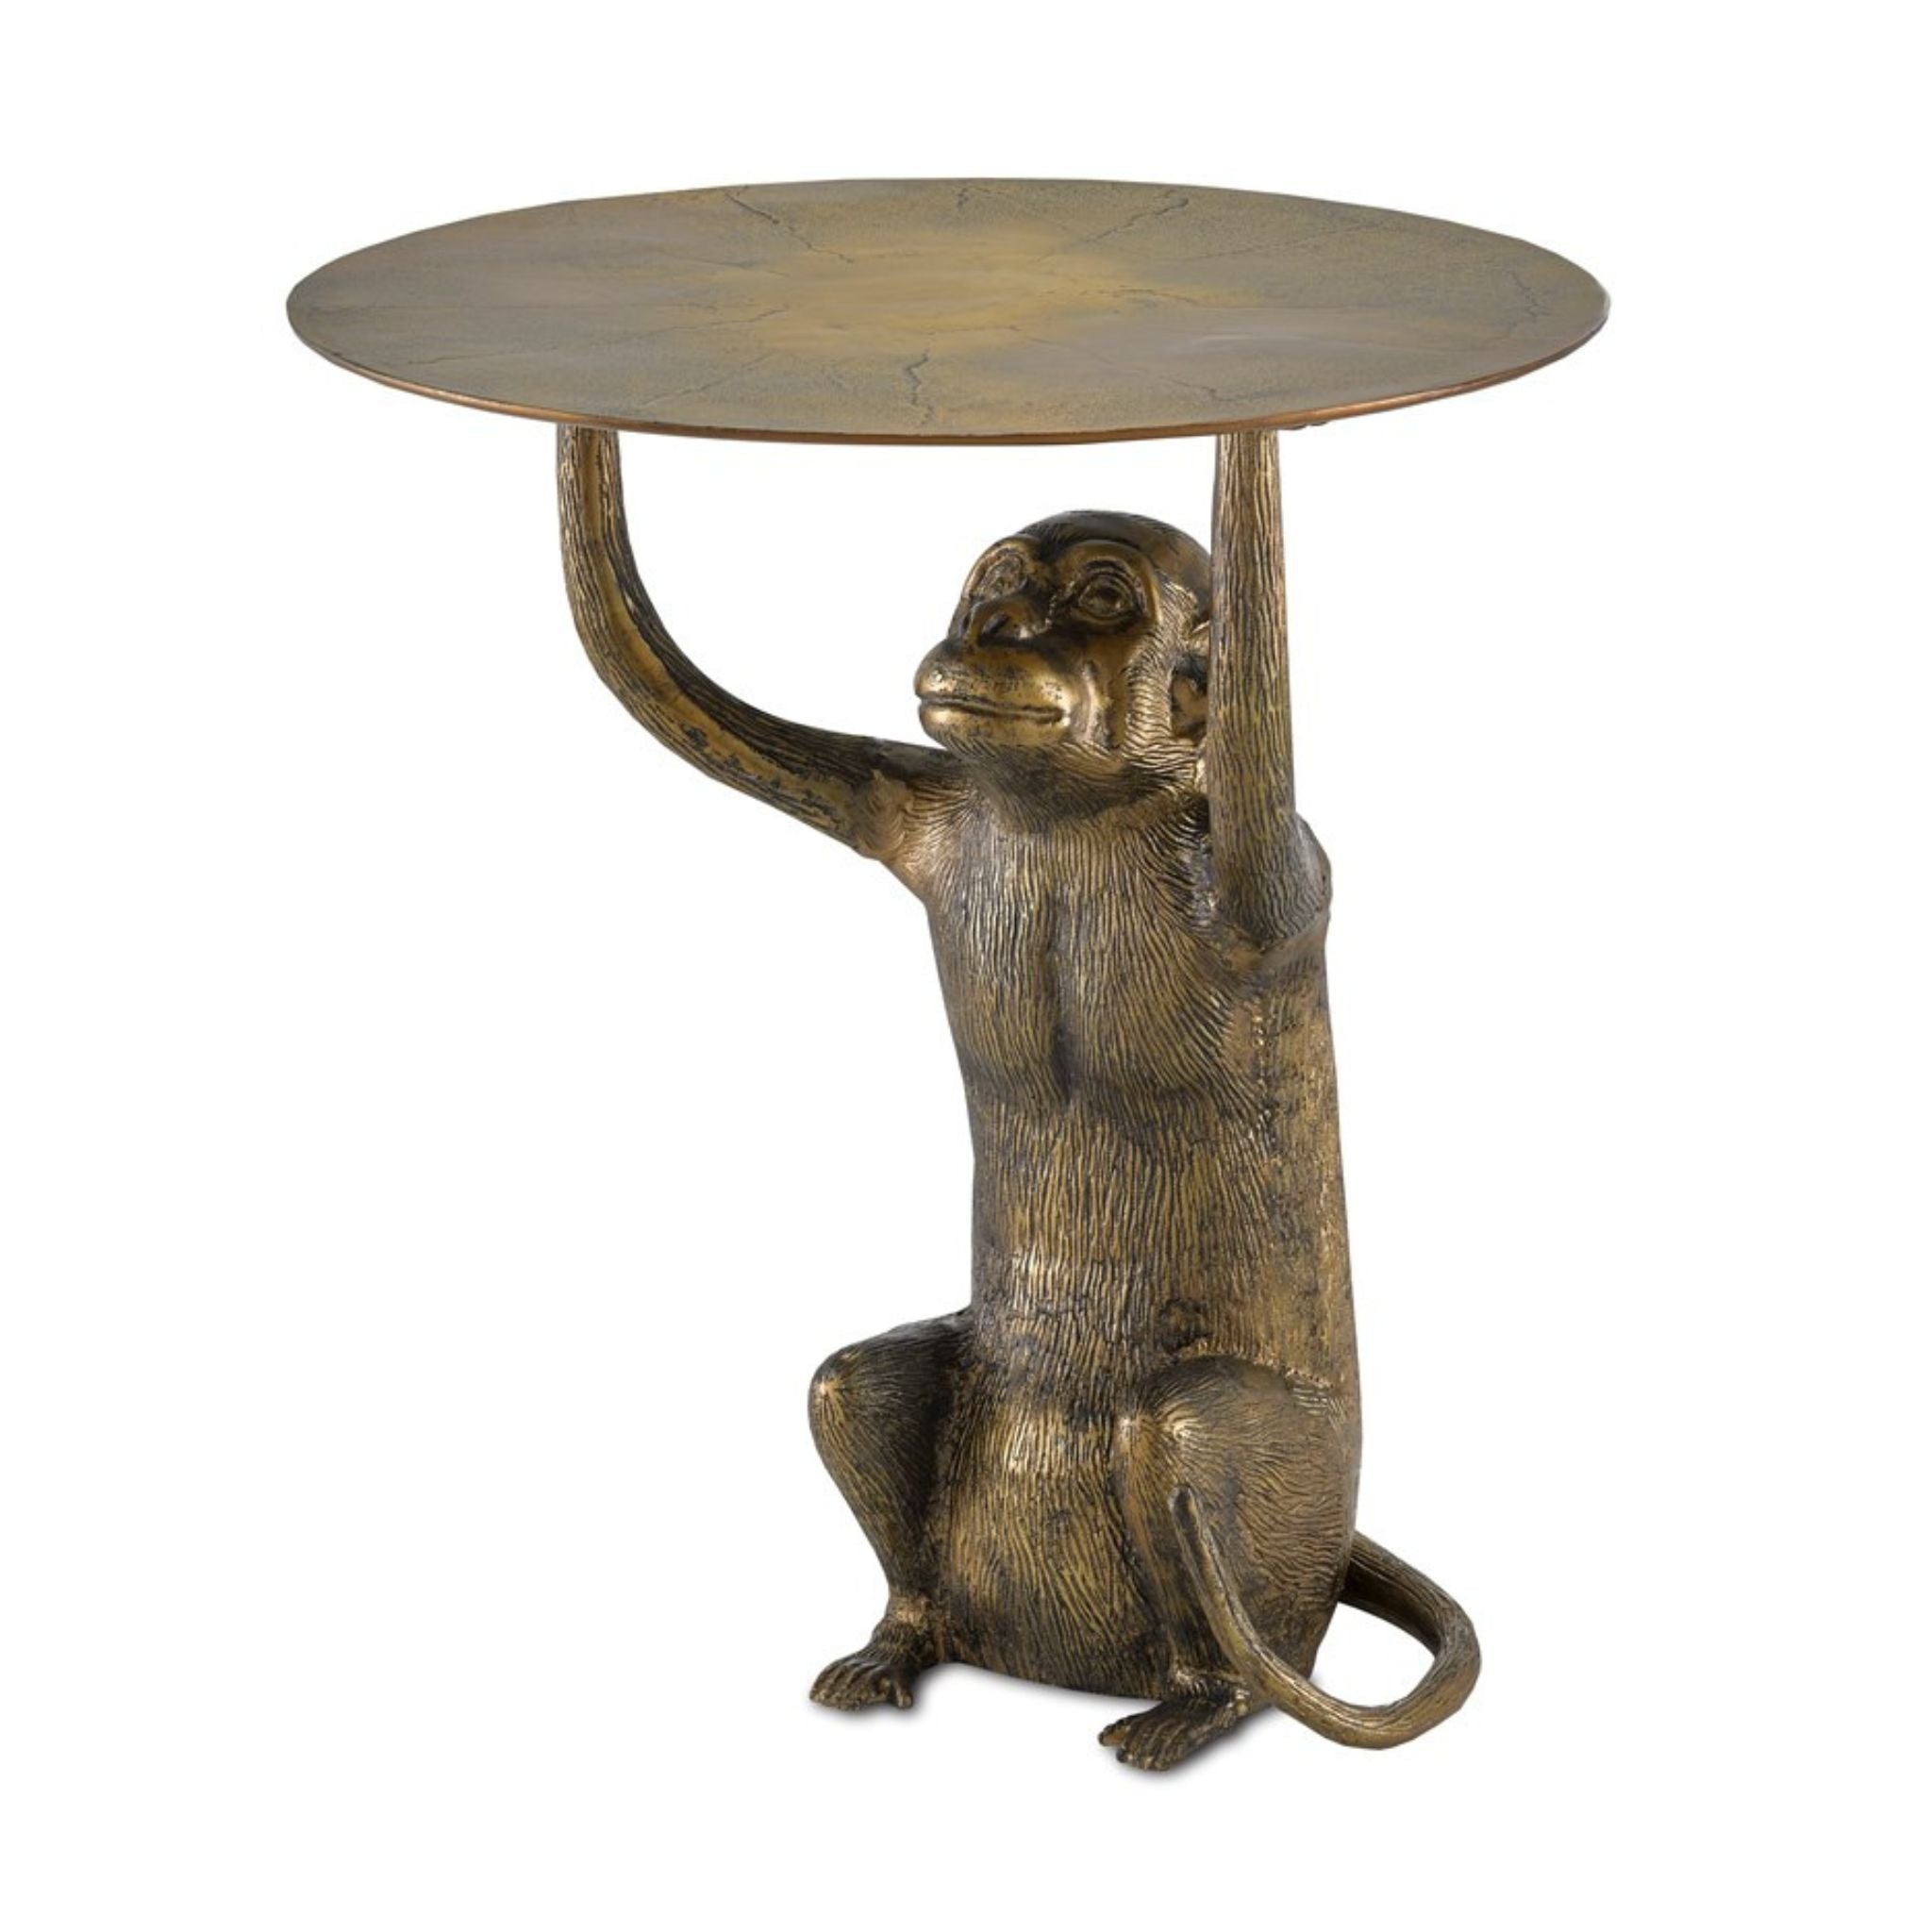 We don’t monkey around when it comes to whimsical design. Case in point is our Abu Accent Table with its seated ape, molded in cast aluminum, that lifts its table top with little effort. The antique gold finish that covers the piece makes the gold occasional table read as if it has aged. Creases molded into the top also support the effect that this is a vintage piece.